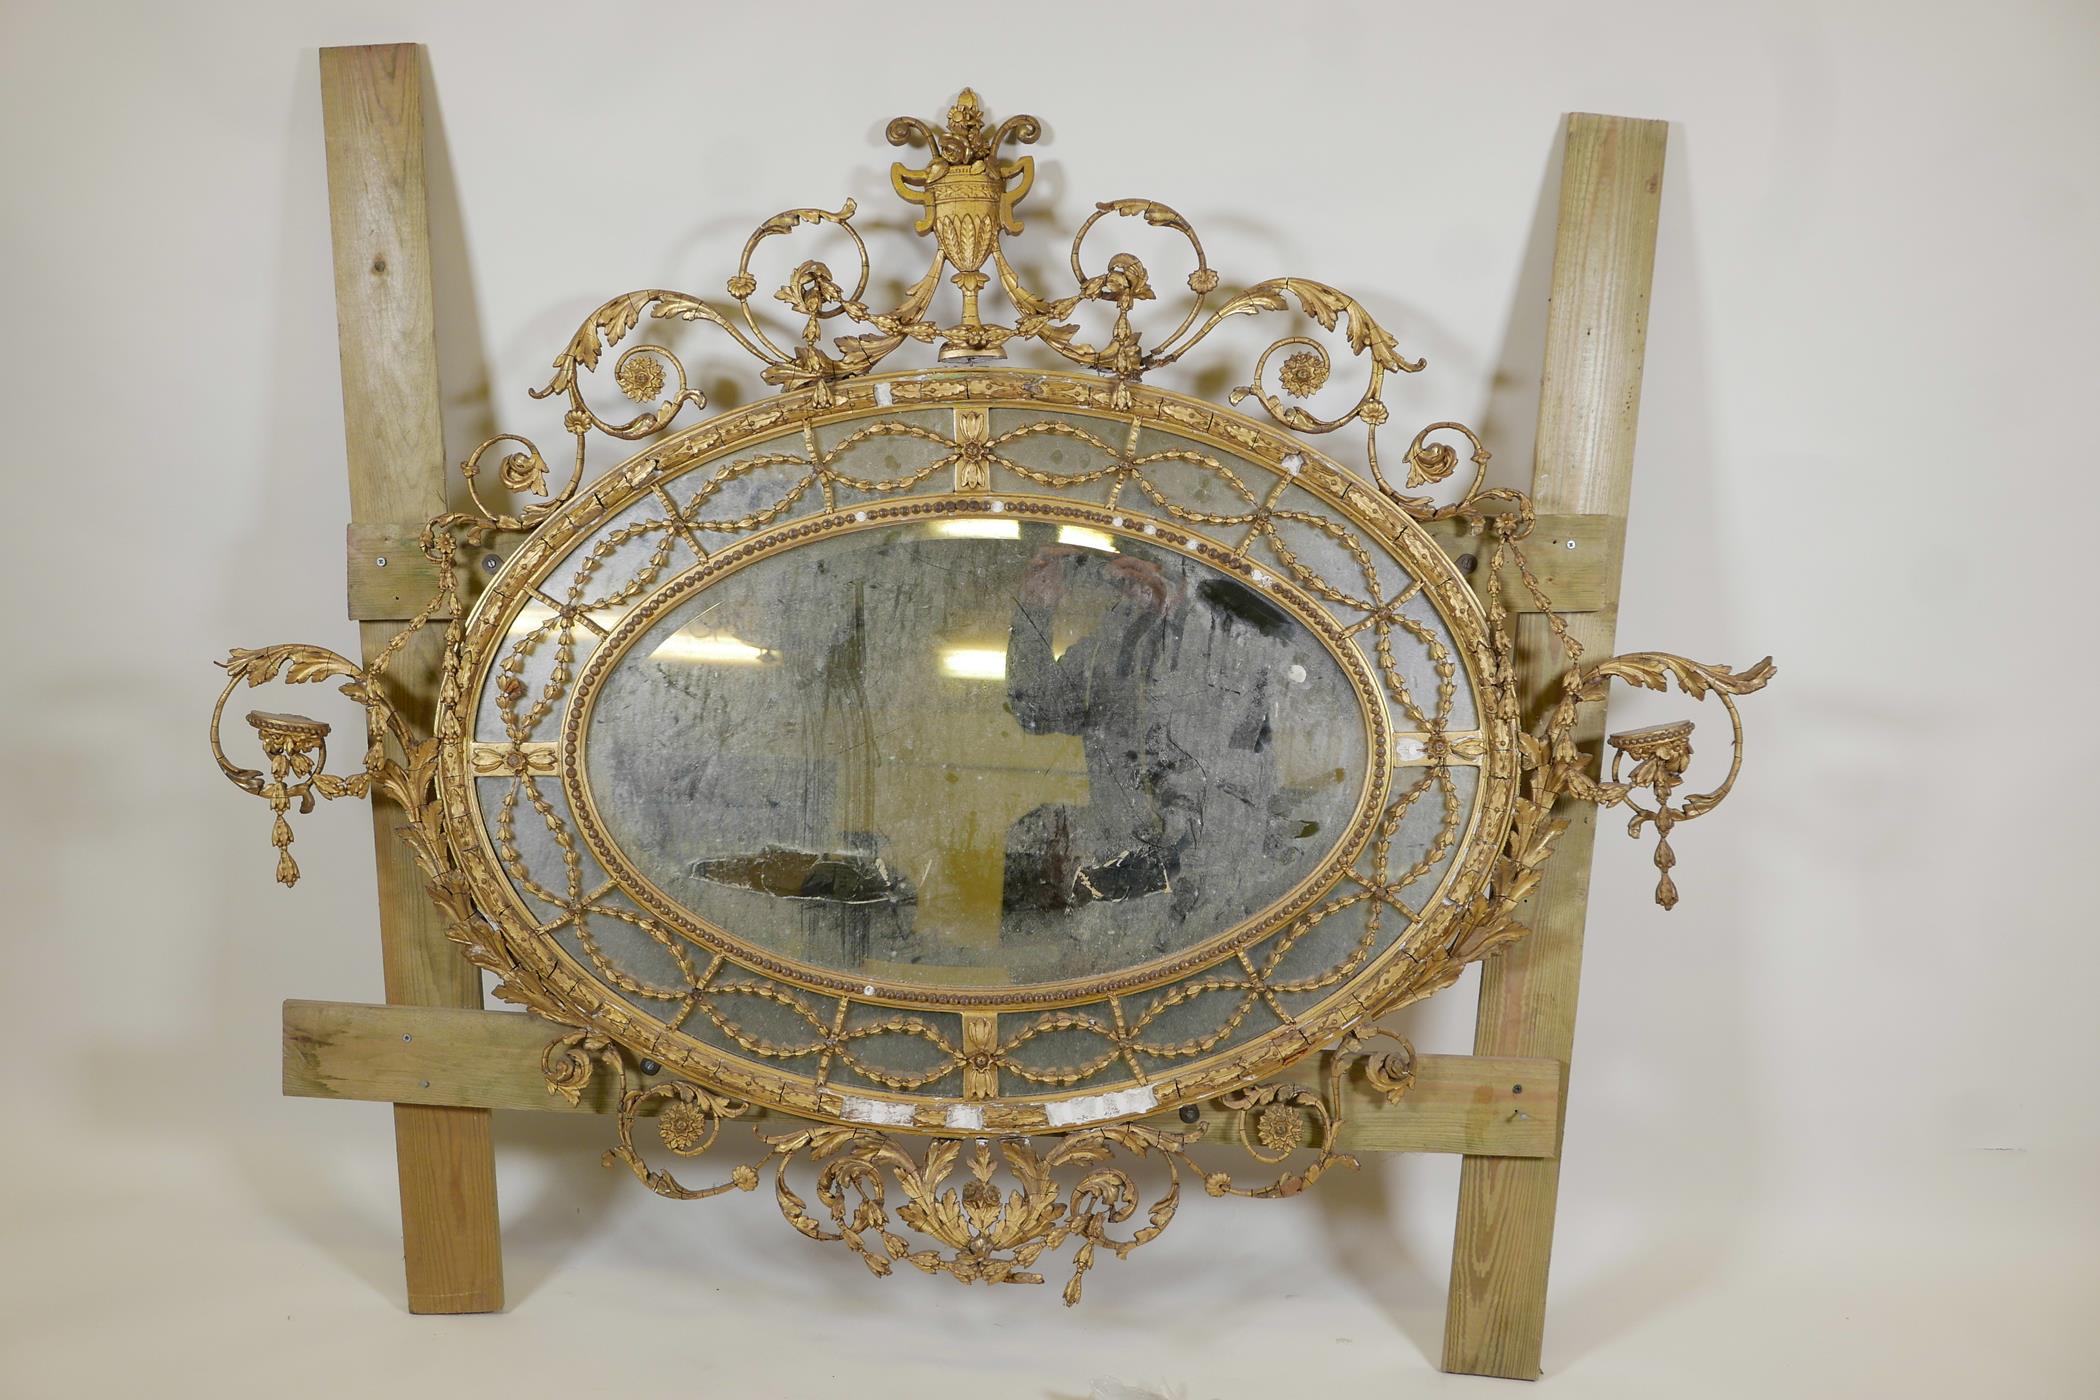 A C19th Adam style giltwood and composition sectional hall mirror, A/F, 60" x 46"